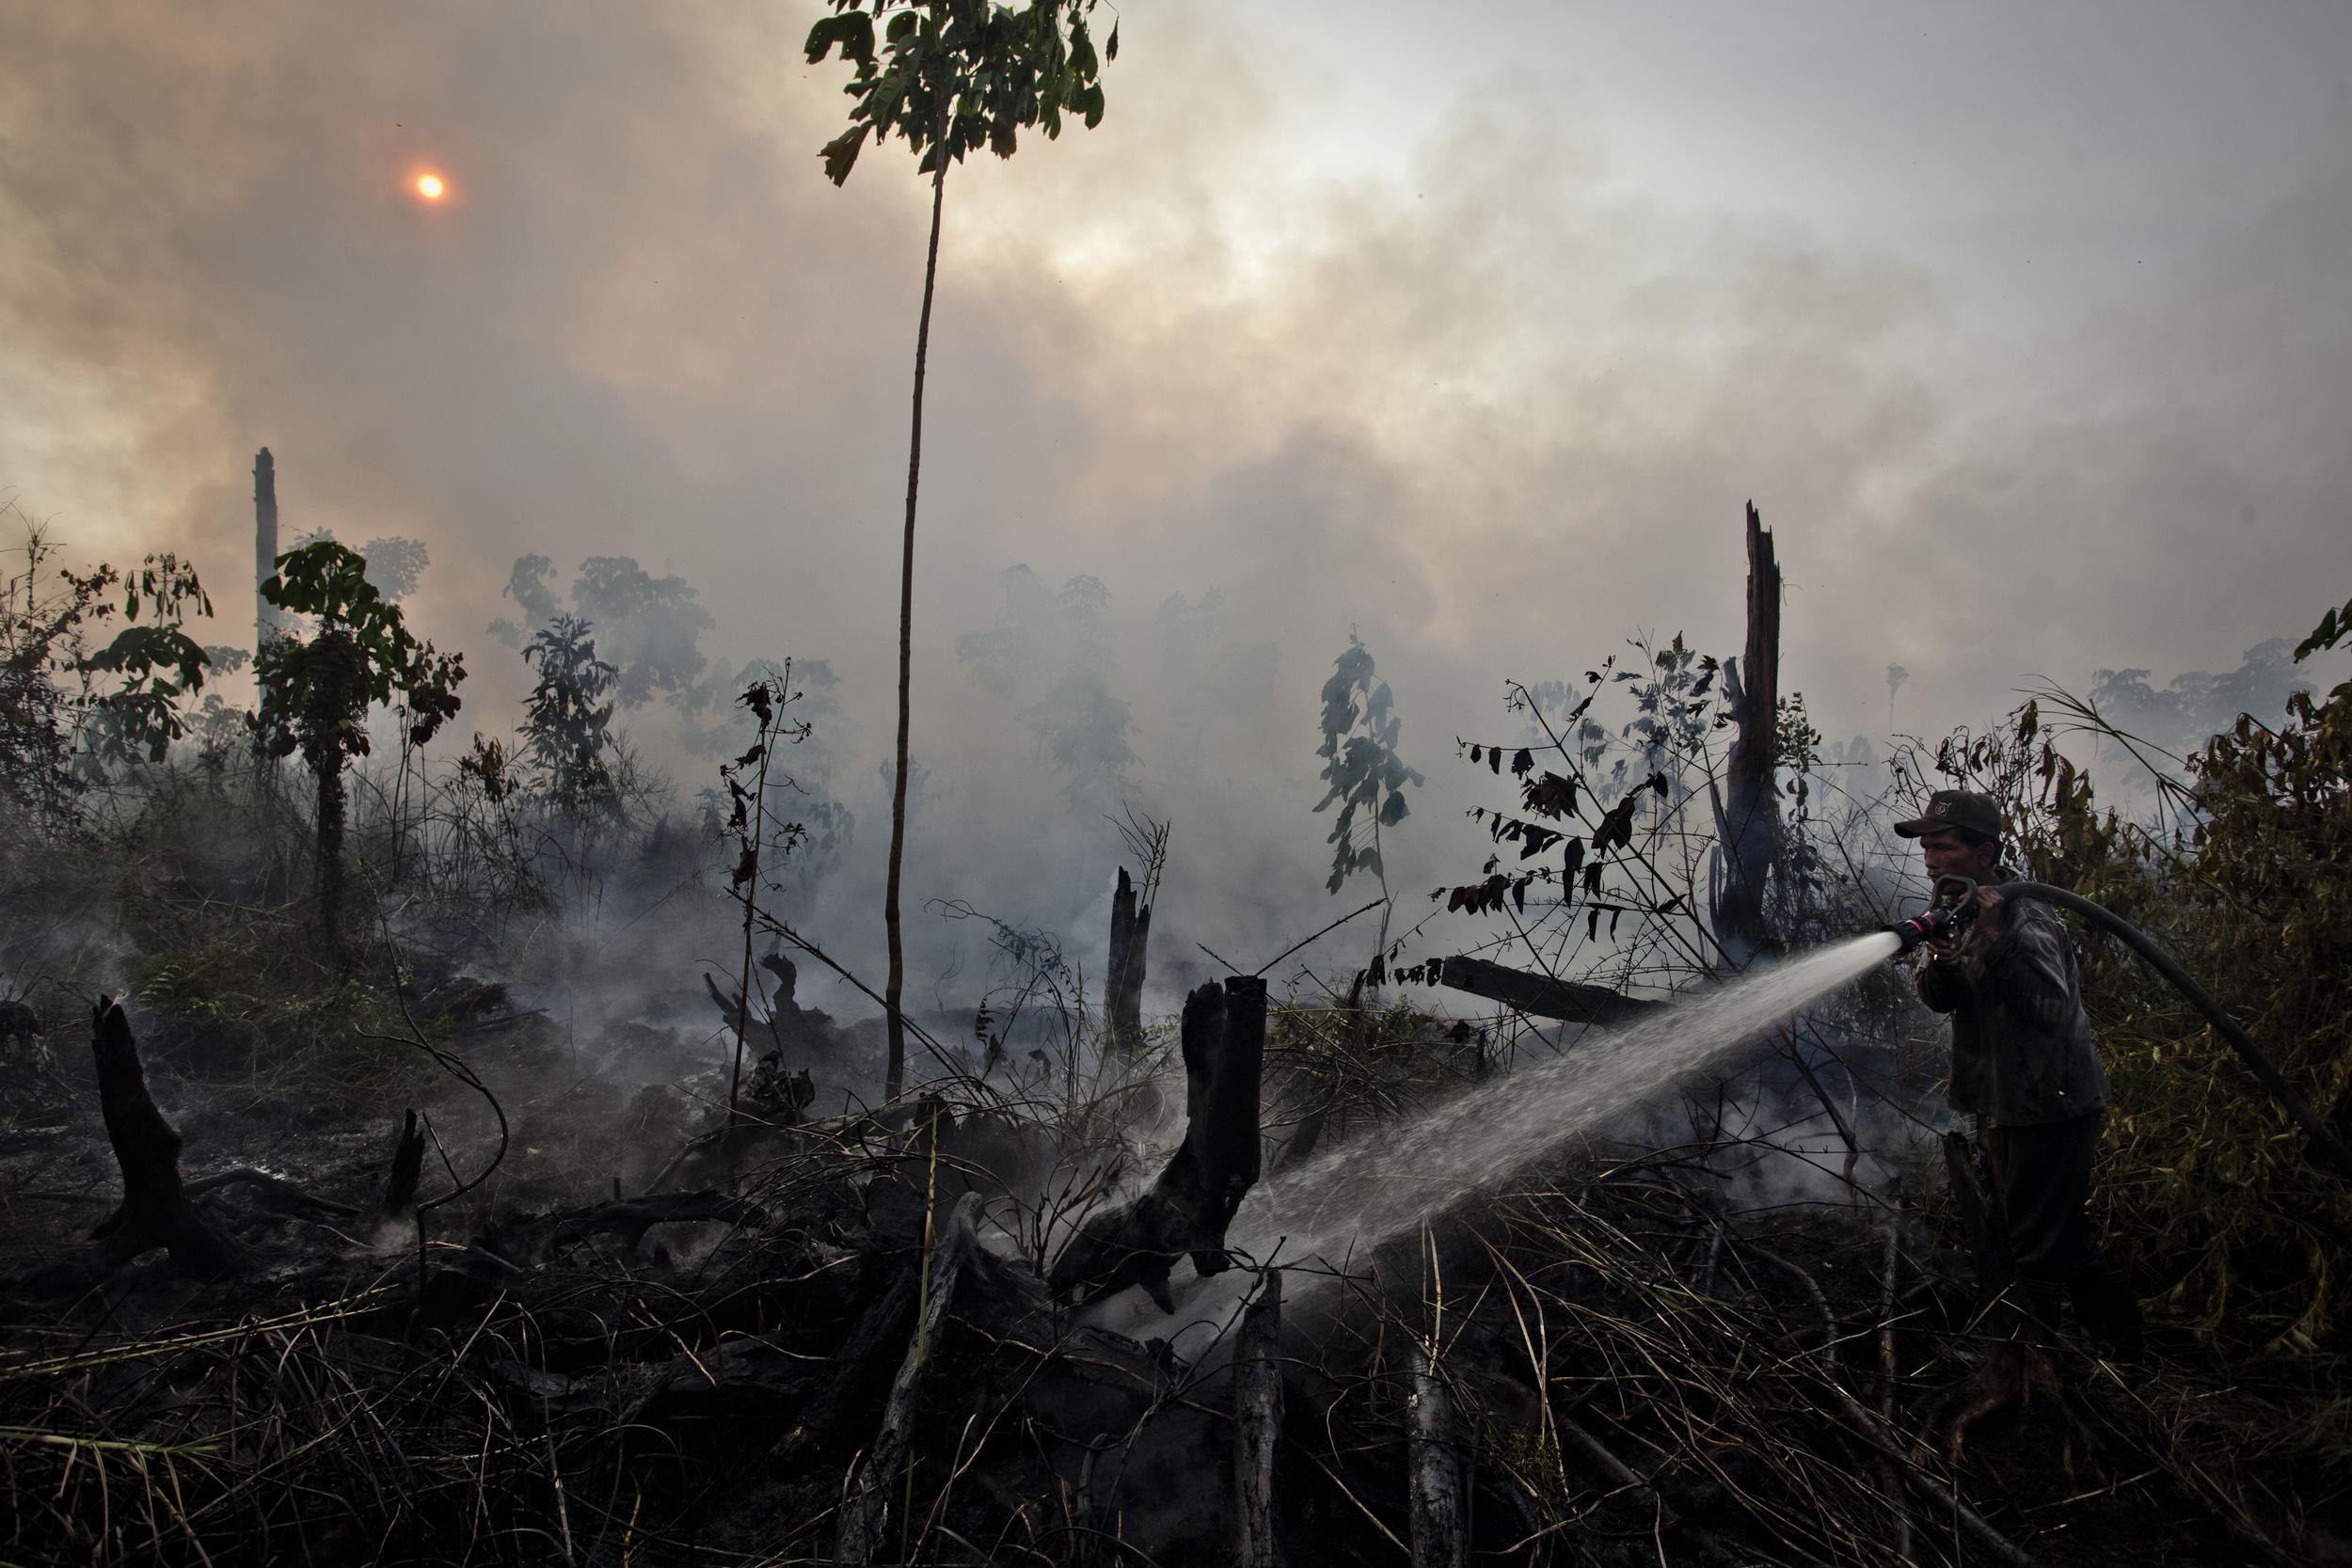 Fighting Forest Fires in Sumatra. © Ulet  Ifansasti / Greenpeace